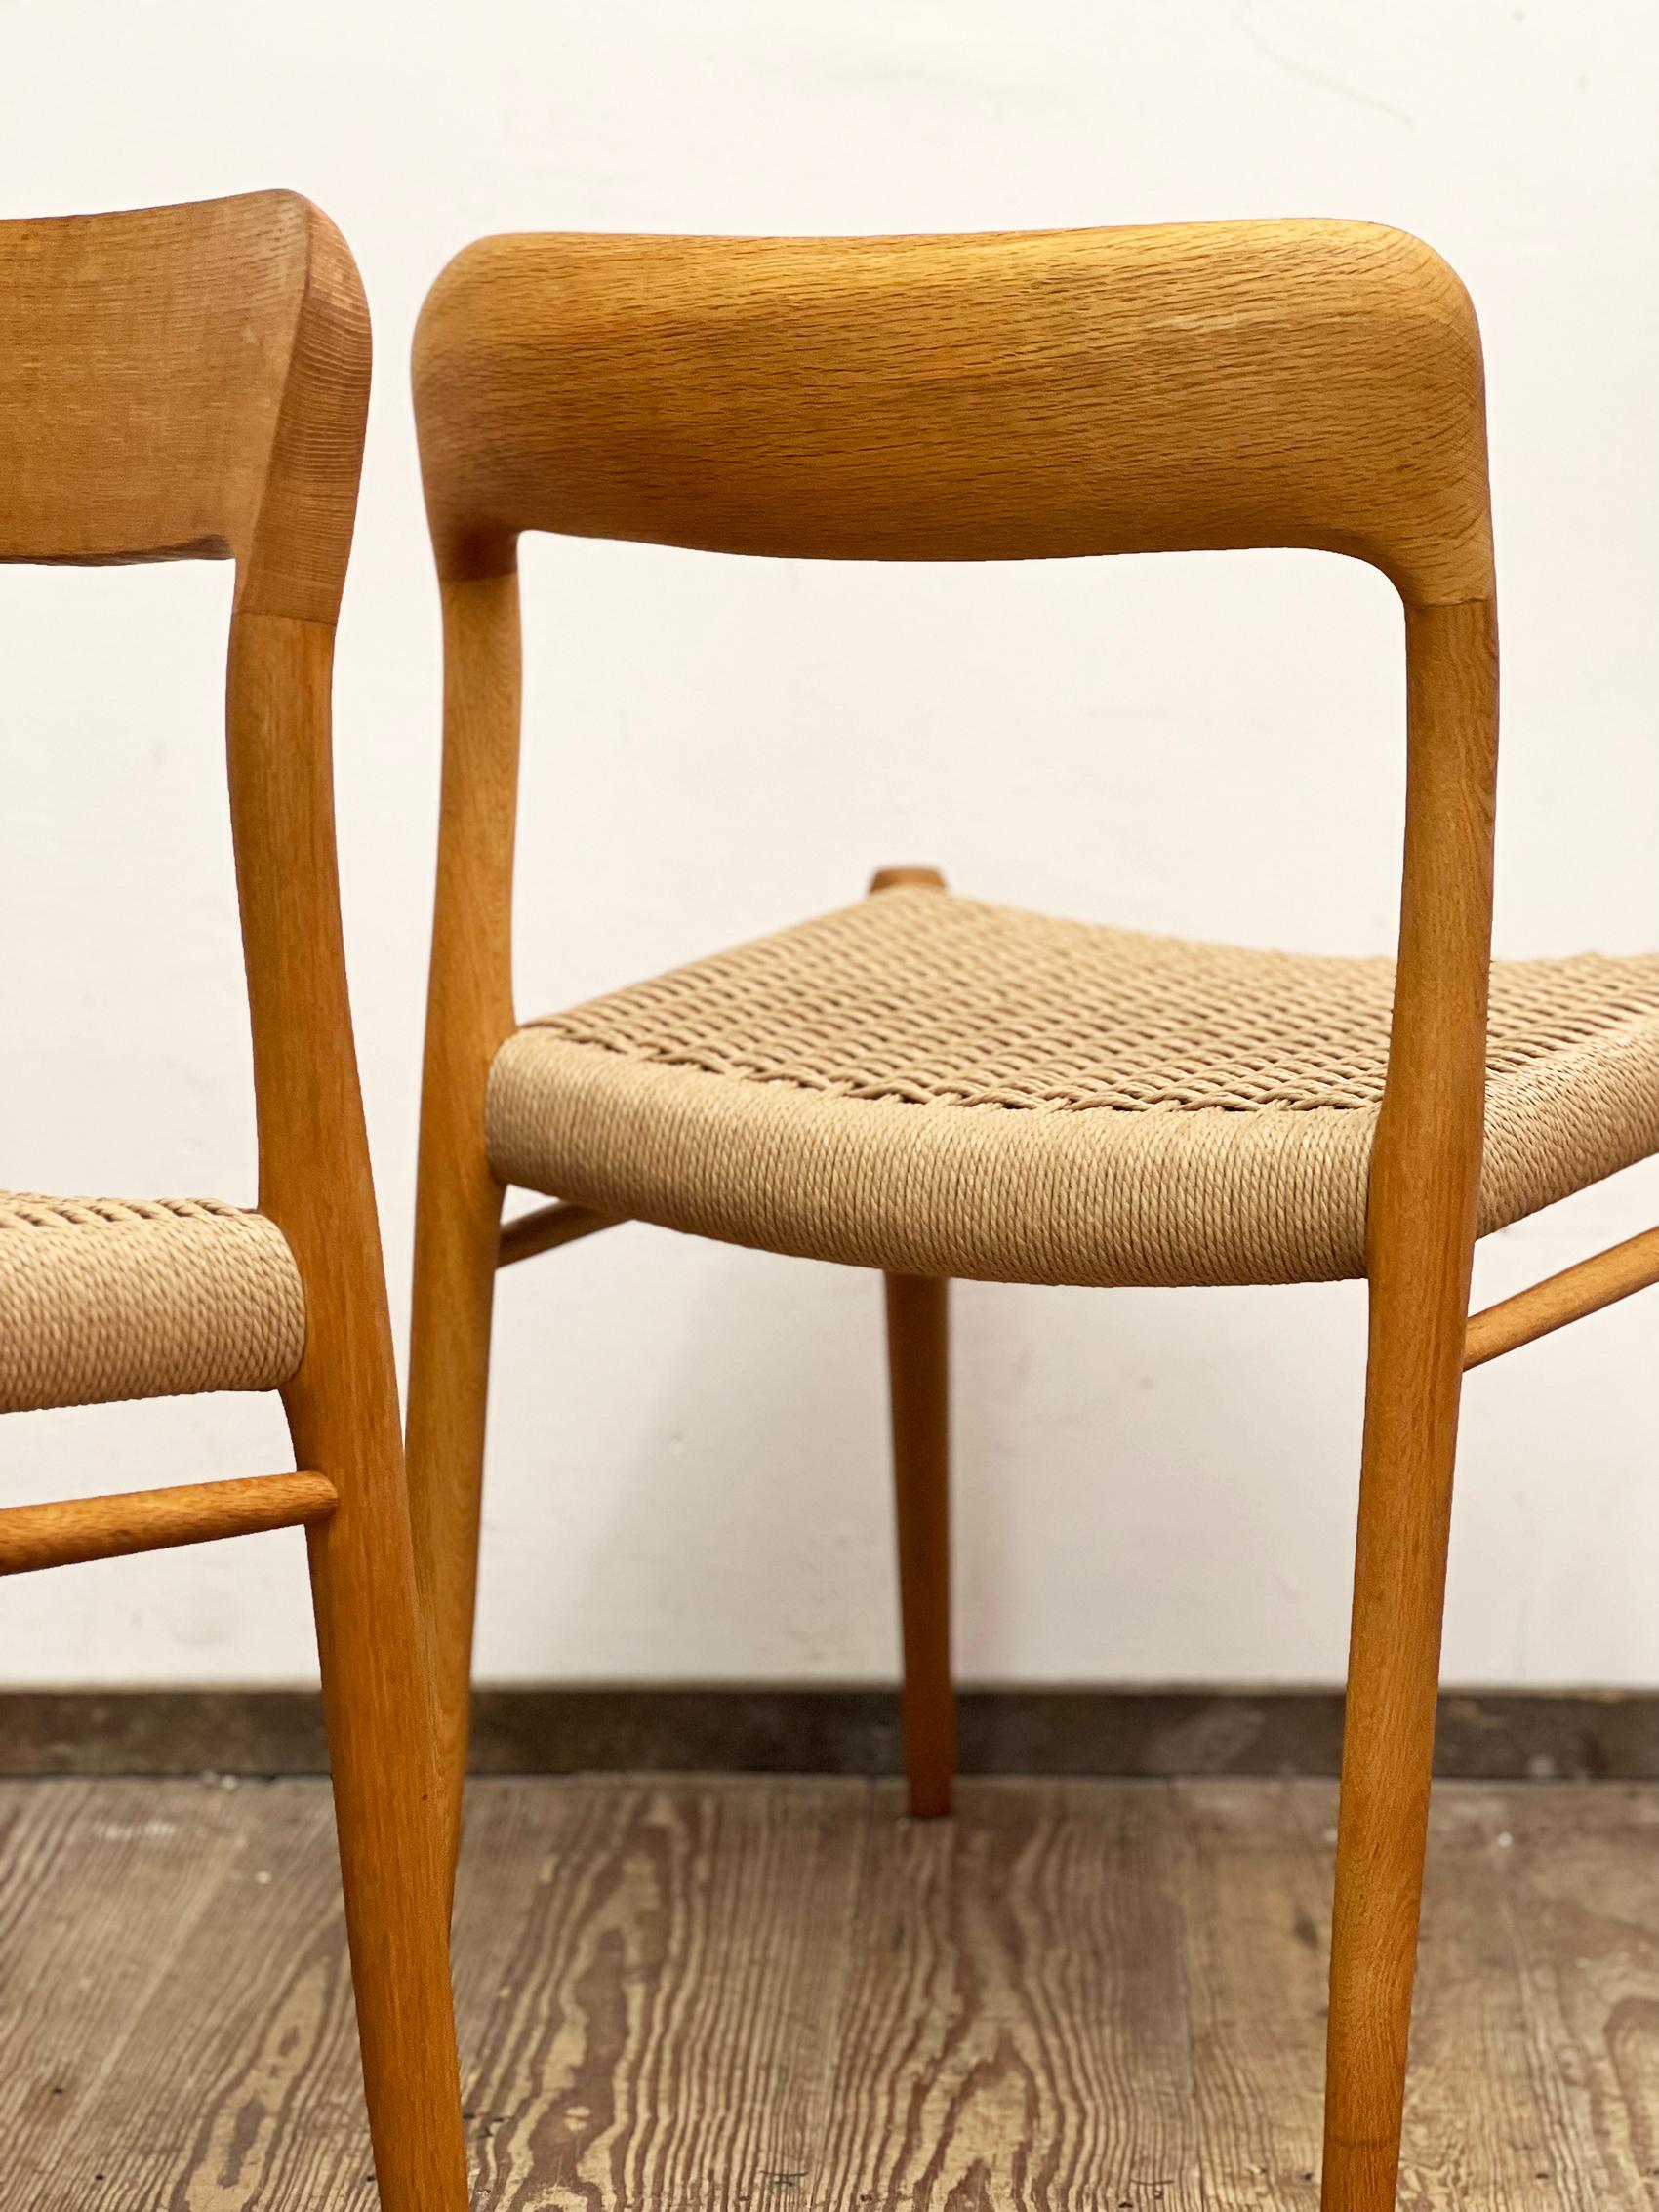 Pair of Mid-Century Oak Dining Chairs #75, Niels O. Møller for J. L. Moller For Sale 7